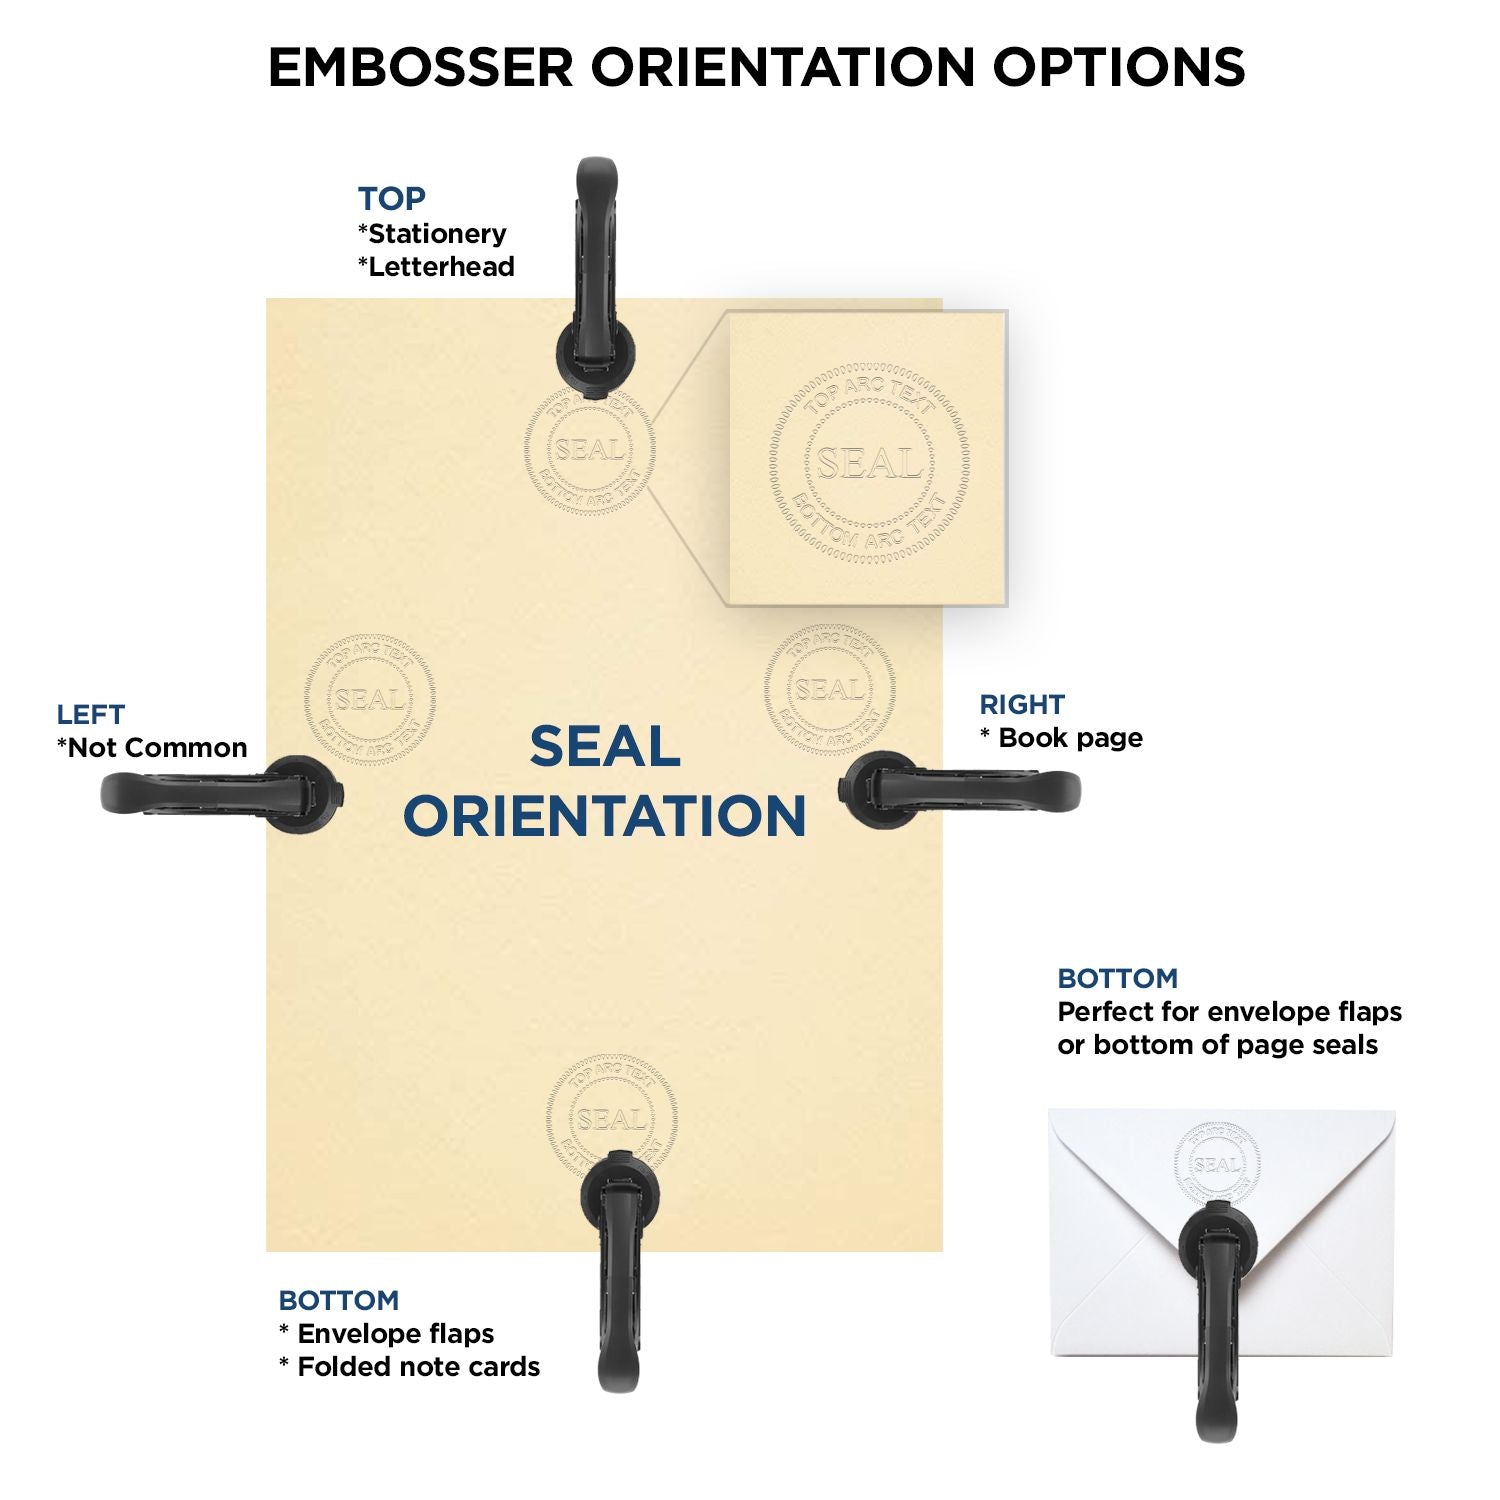 An infographic for the Heavy Duty Cast Iron Oklahoma Land Surveyor Seal Embosser showing embosser orientation, this is showing examples of a top, bottom, right and left insert.